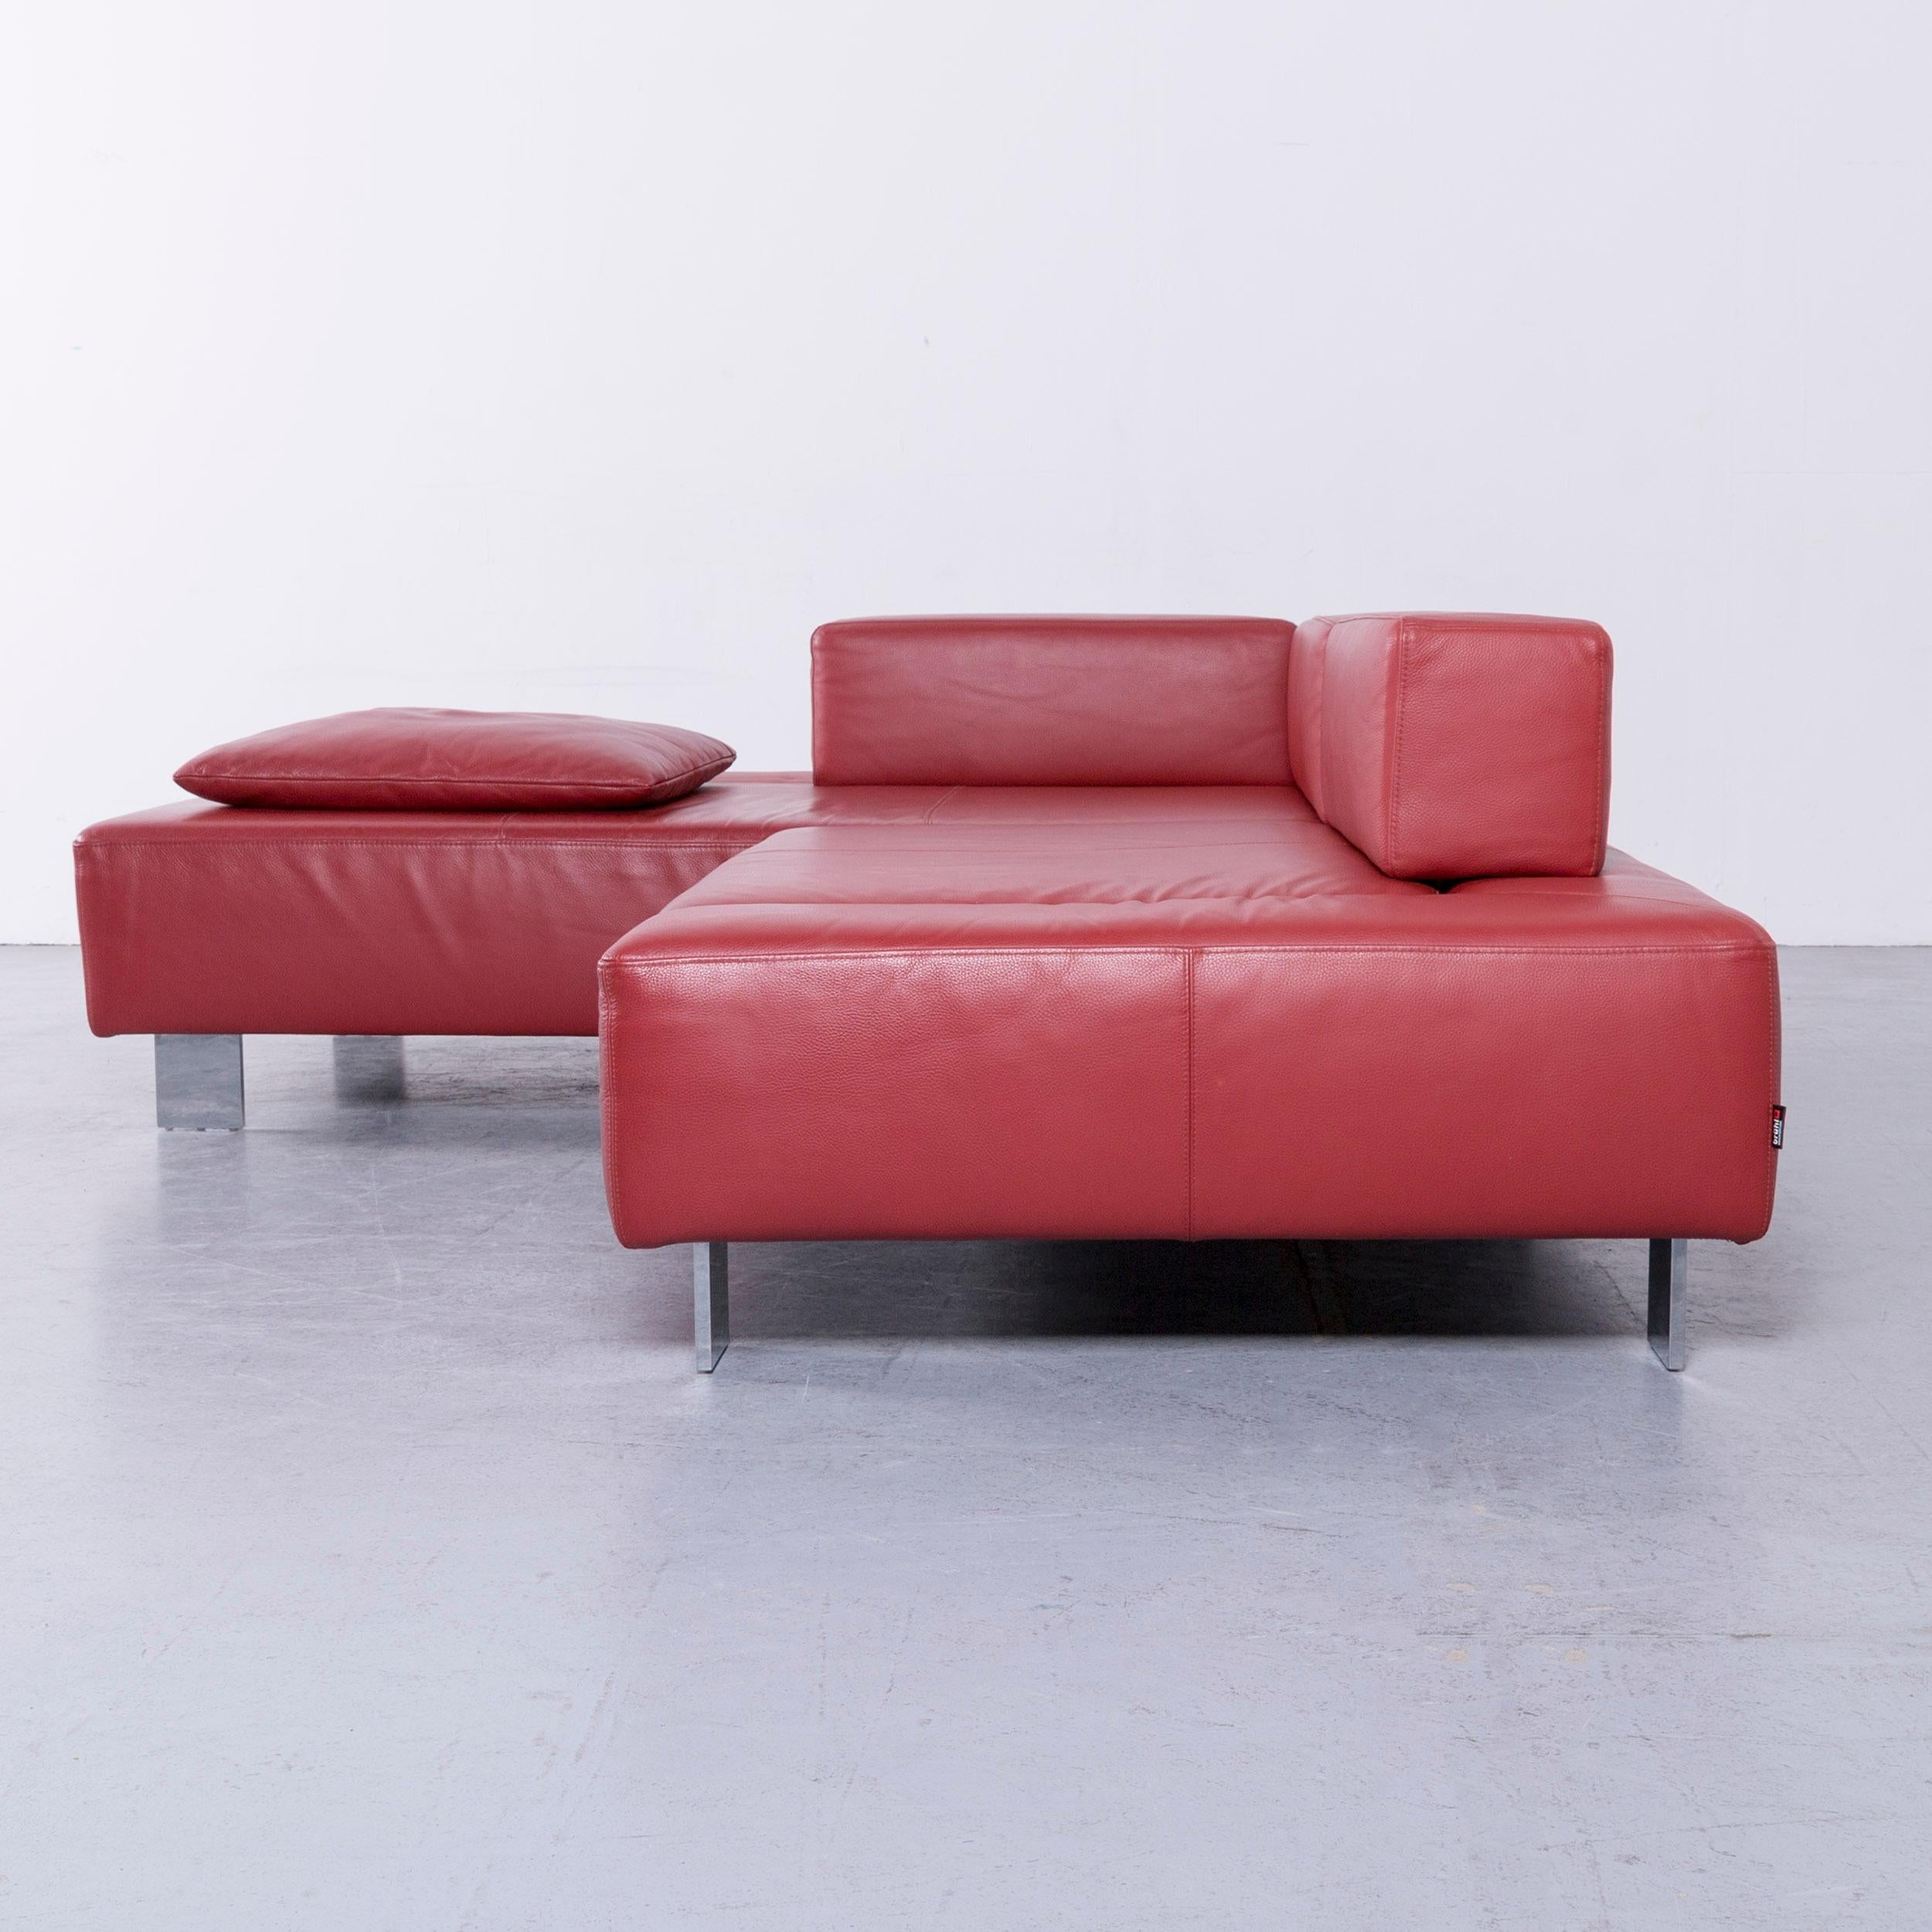 Brühl & Sippold Fields Designer Sofa Red Leather Corner Sofa with Function For Sale 4